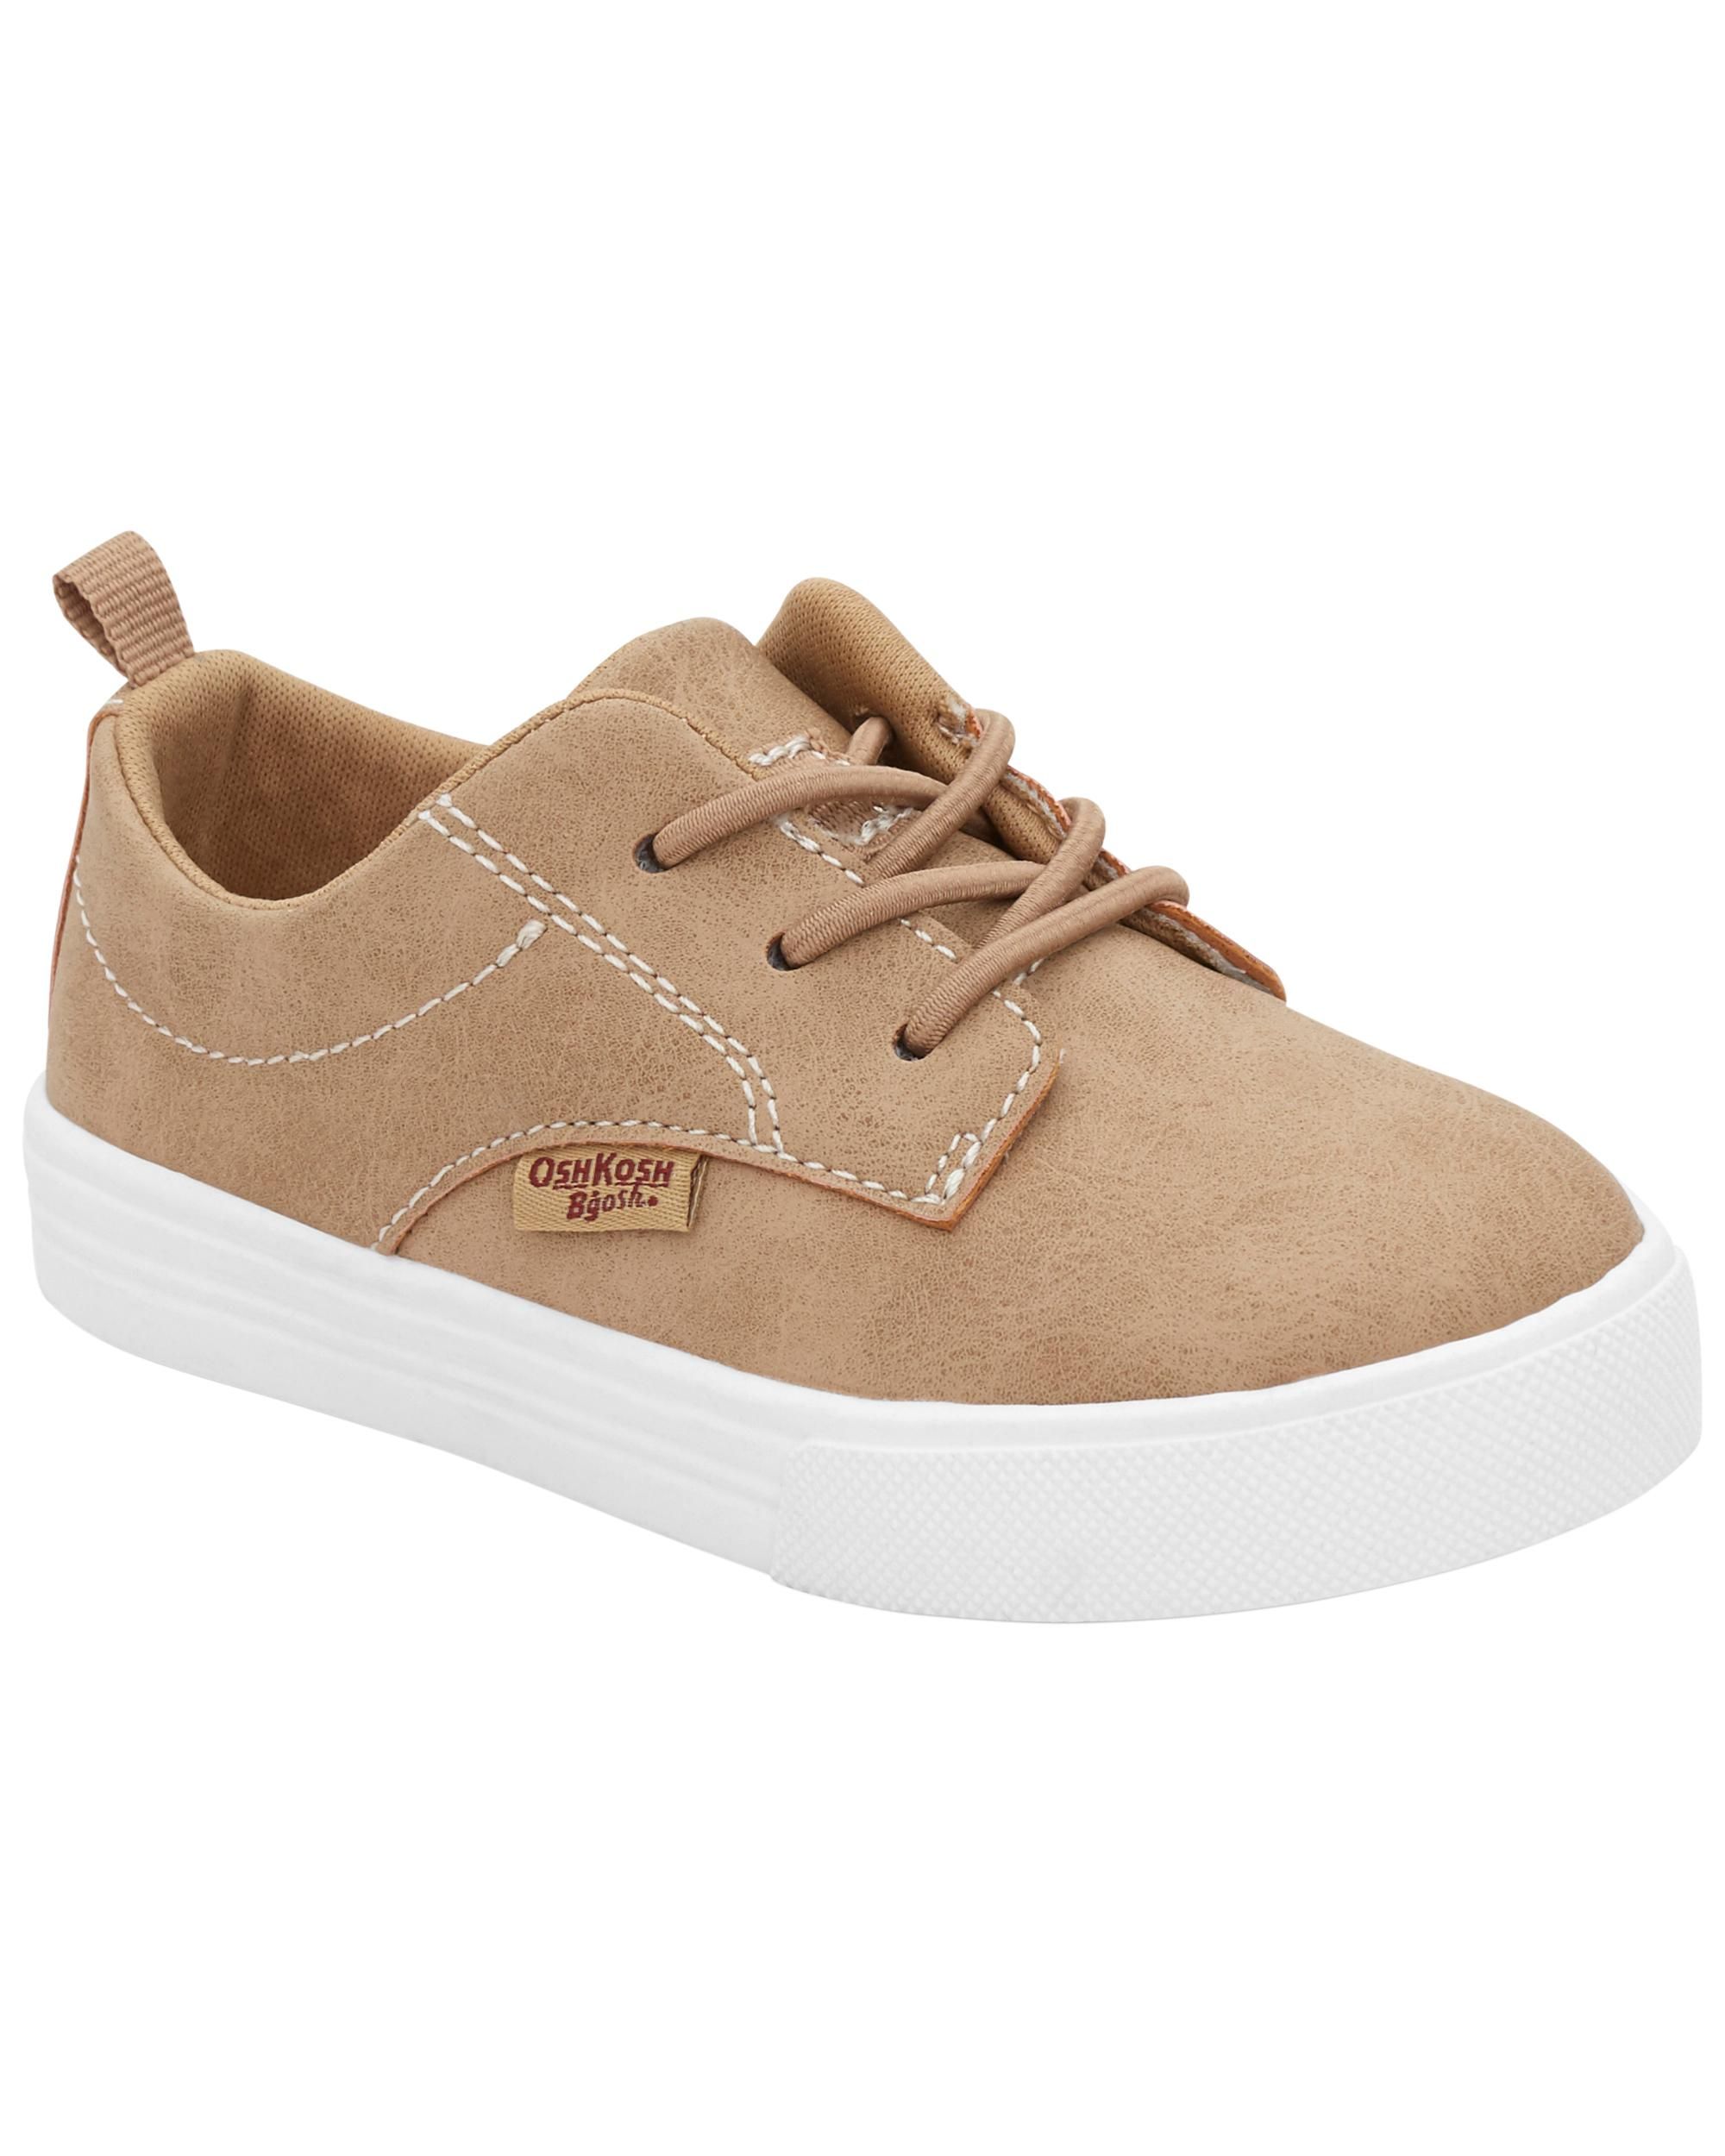 Toddler Pull-On Casual Shoes | Carter's